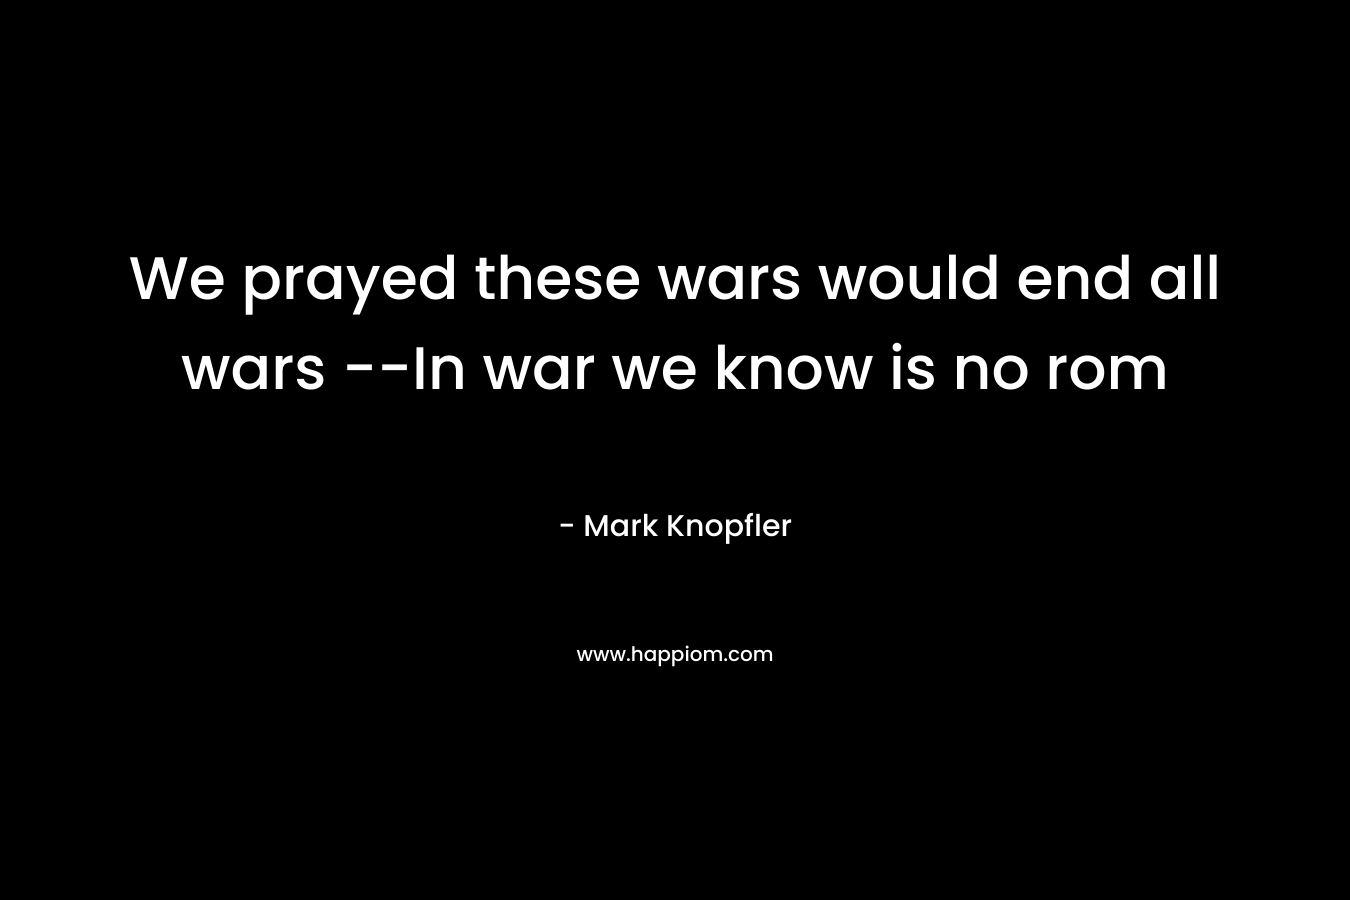 We prayed these wars would end all wars --In war we know is no rom